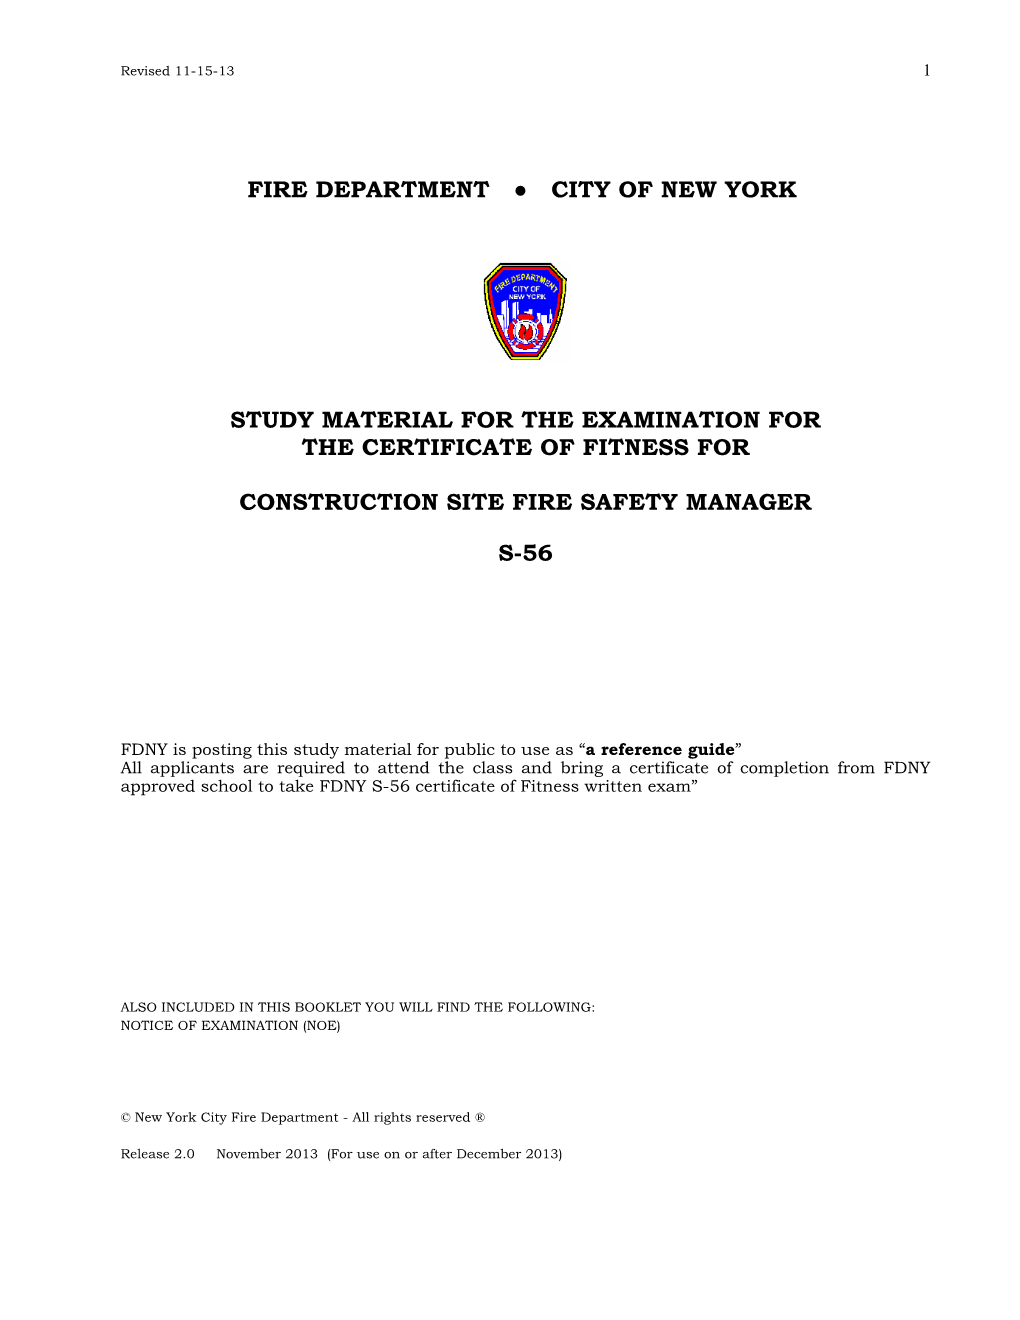 Fire Department City of New York Study Material